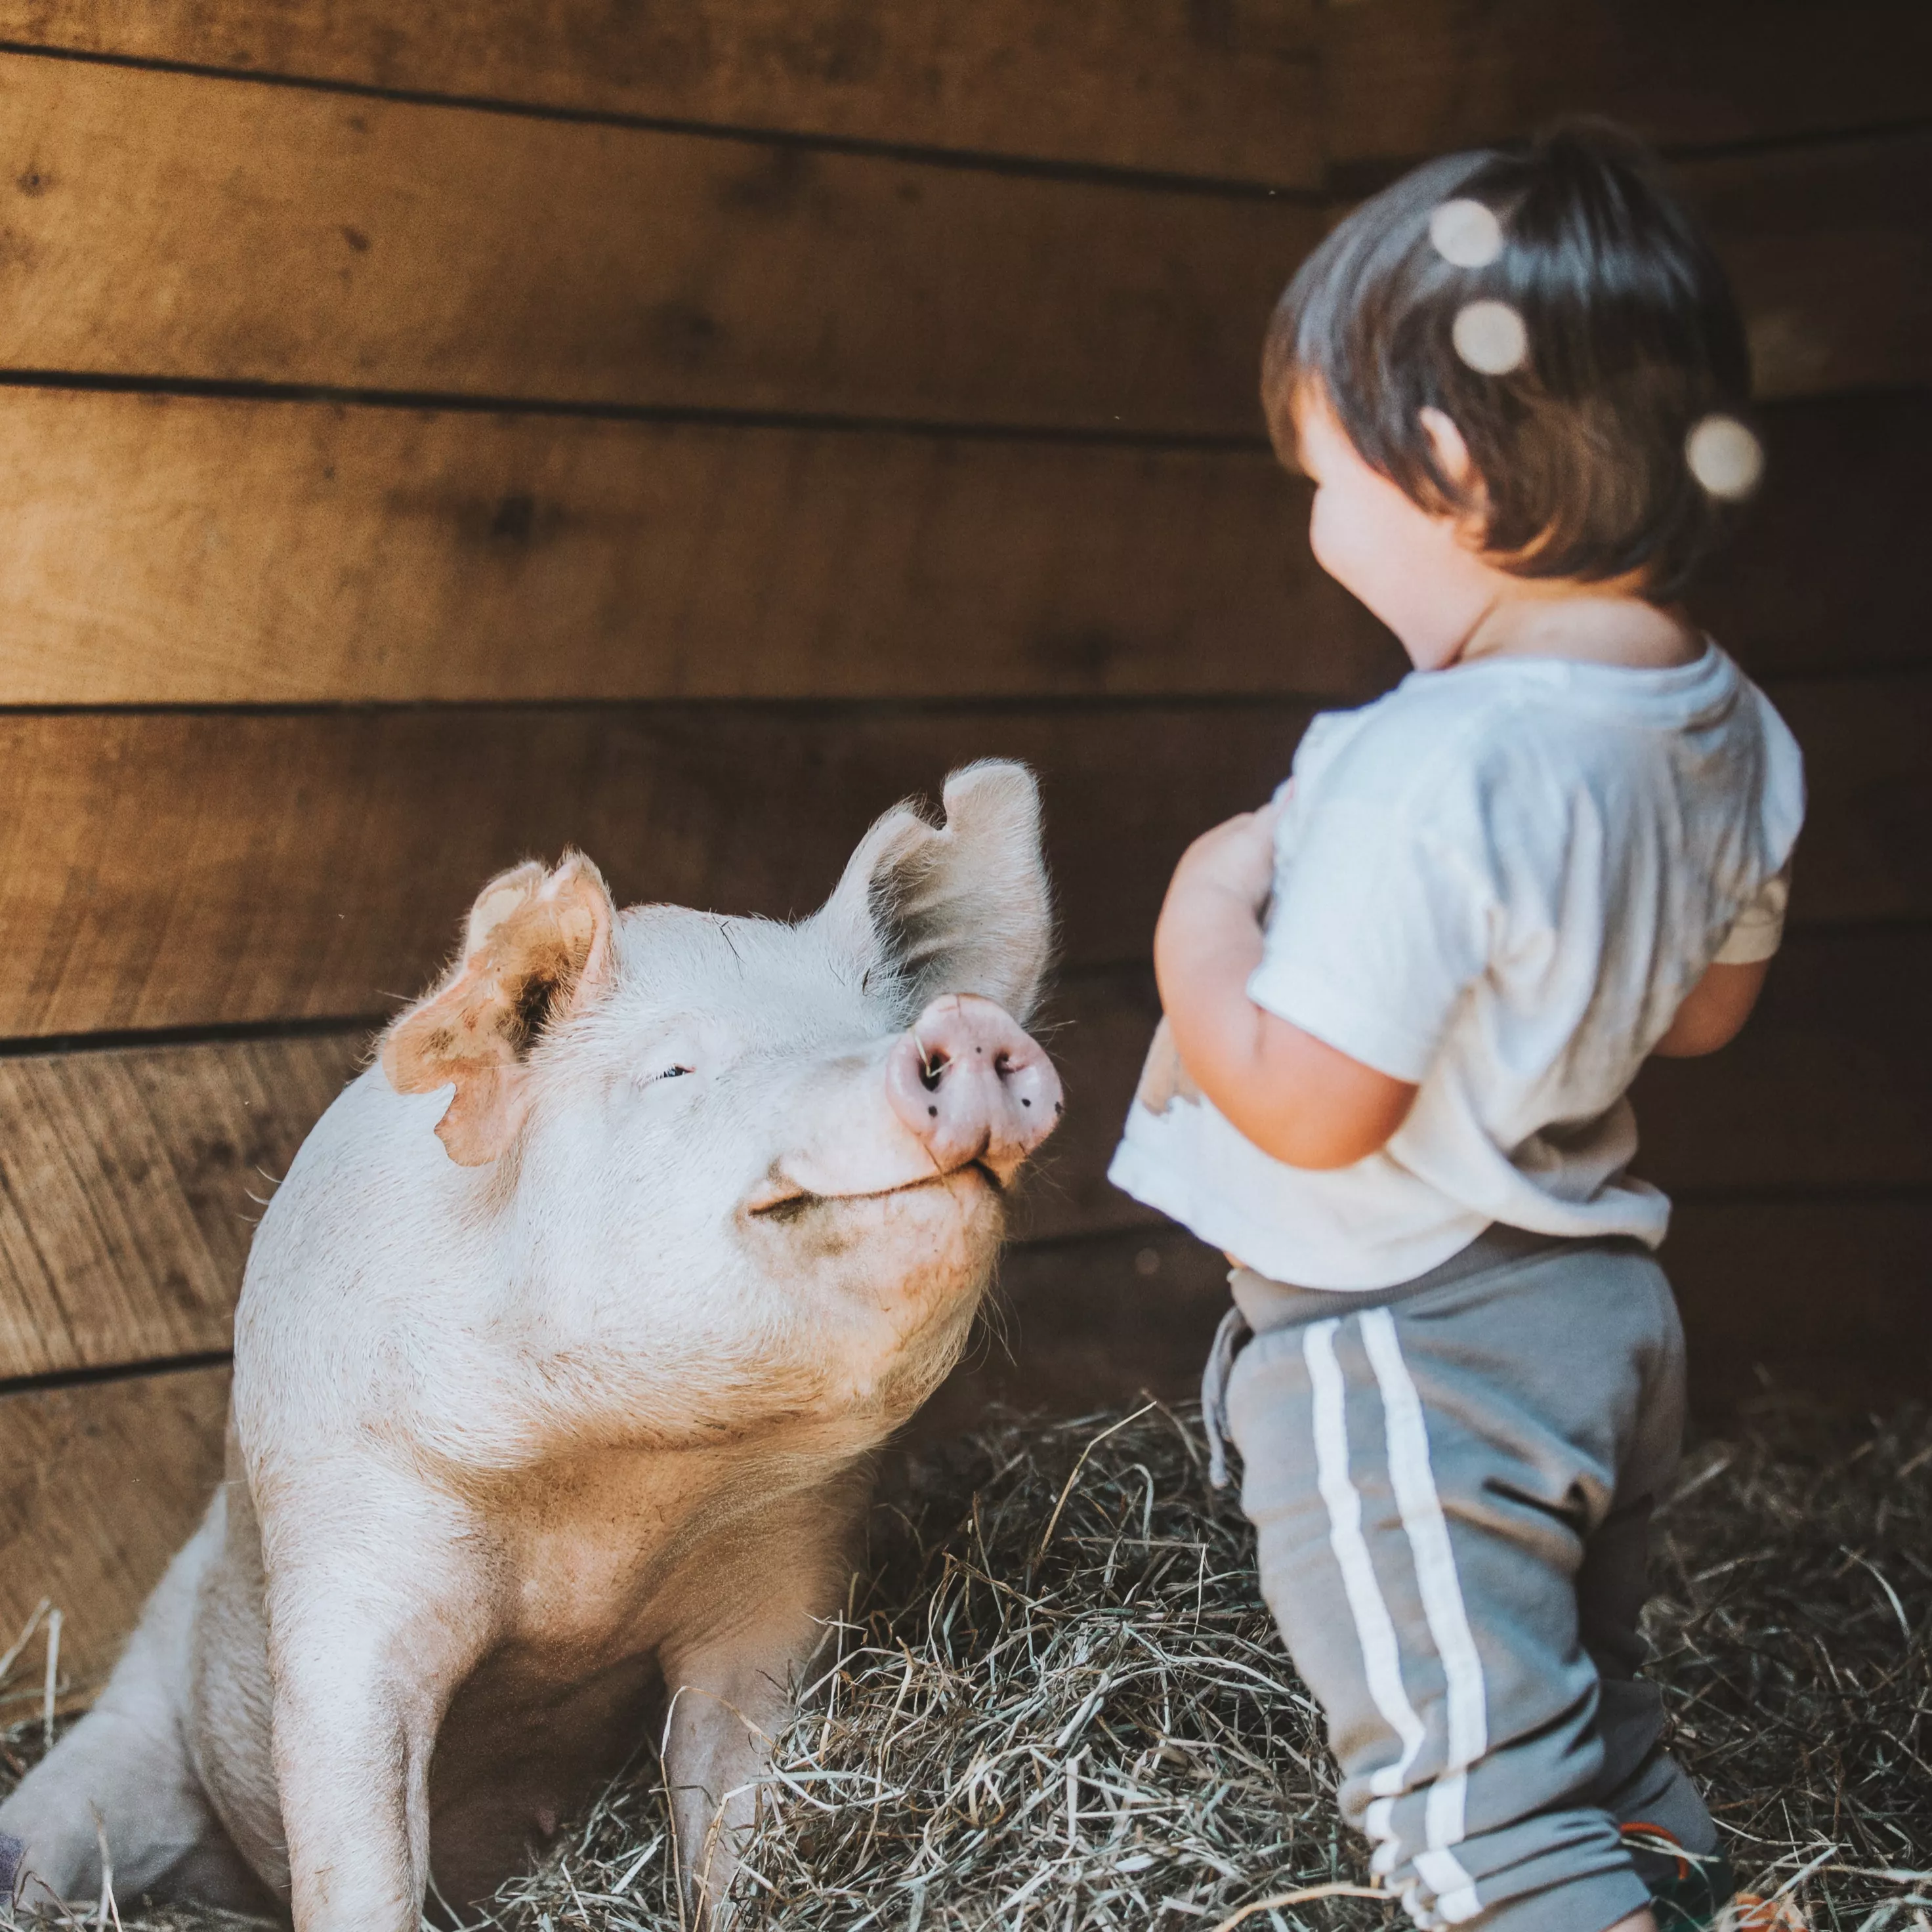 Pig fact: Pigs are intelligent and sensitive animals. This pig is looking at a toddler with soft, curious eyes. 